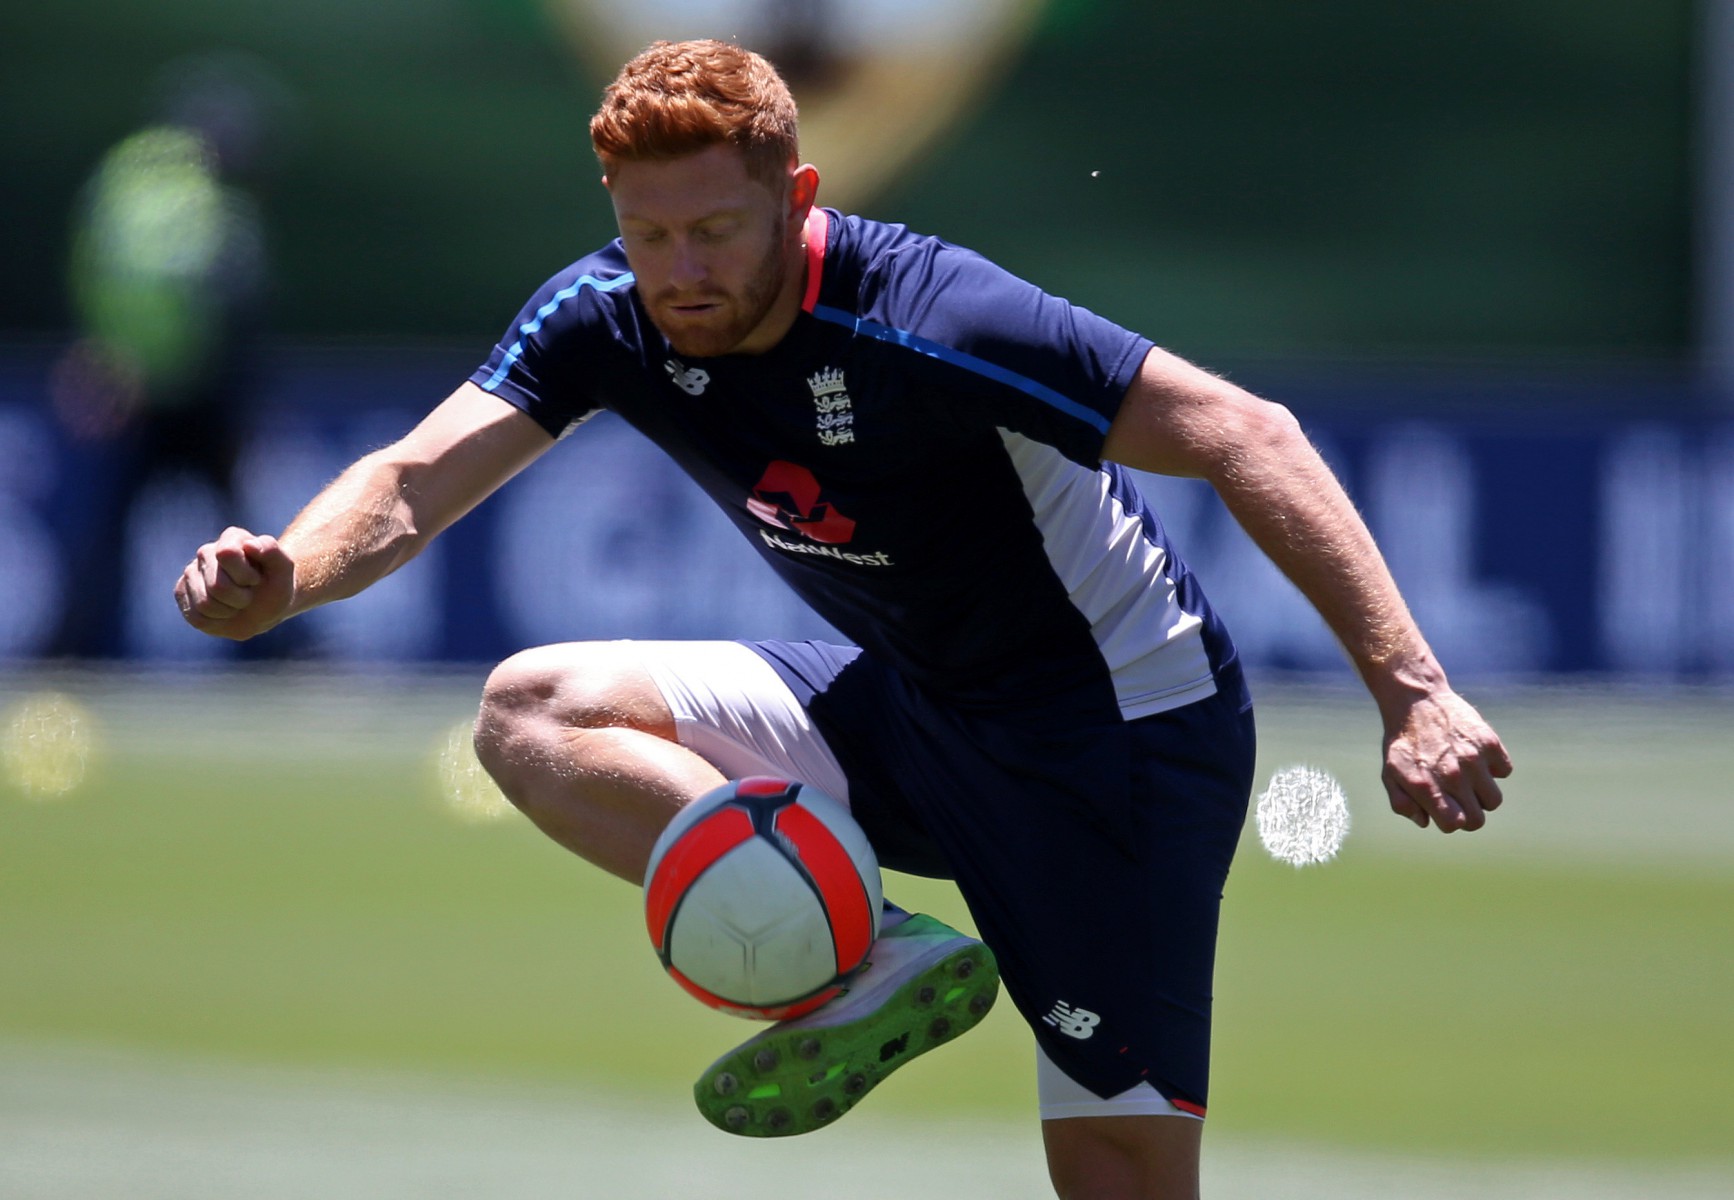 , England cricket team BAN playing football in warm-up after Rory Burns injury ahead of South Africa test on cursed tour